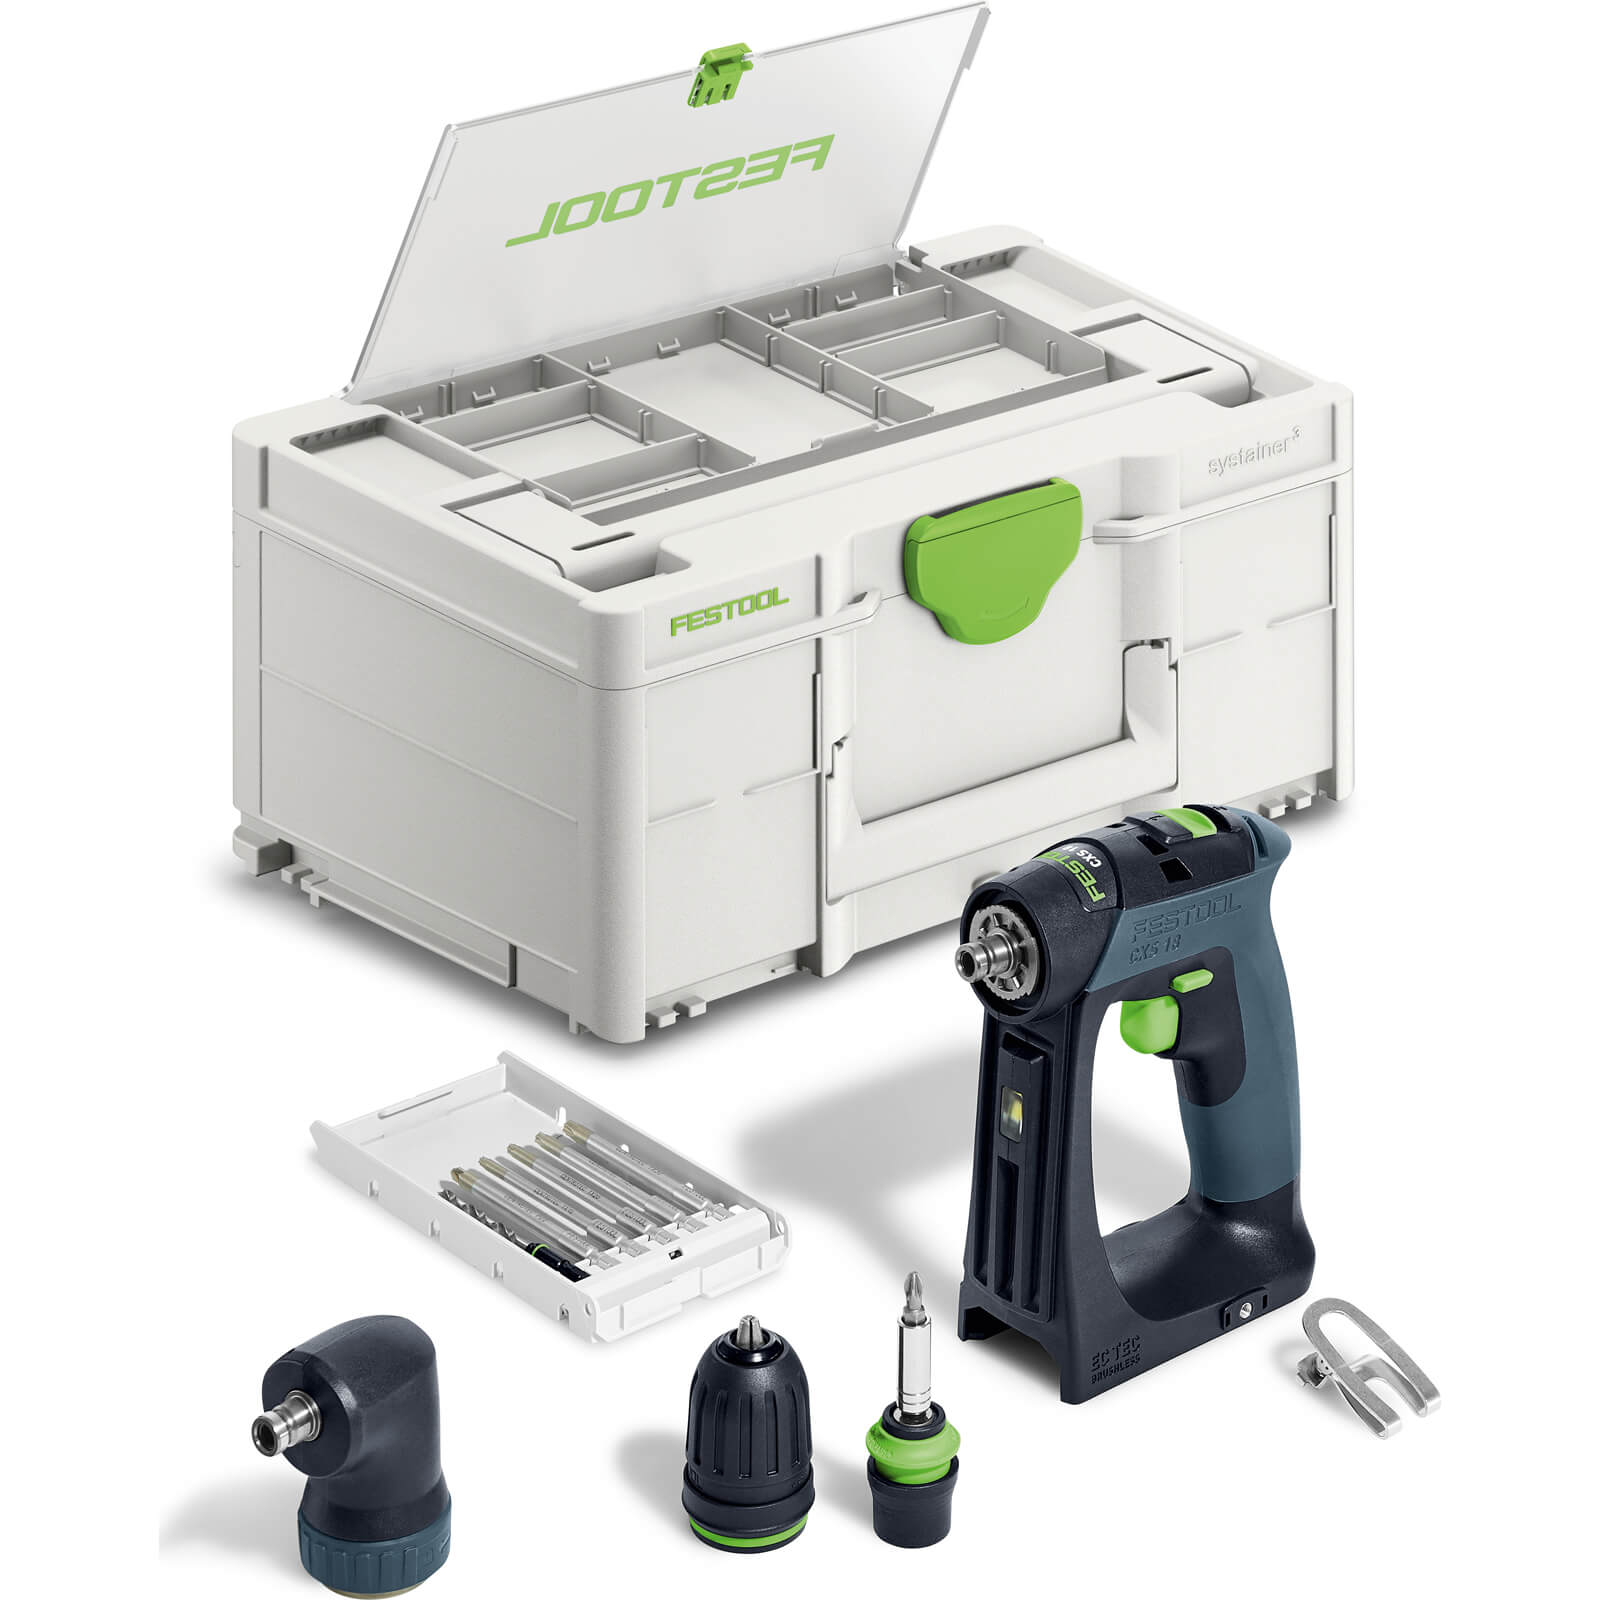 Image of Festool CXS 18 18v Cordless Brushless Drill Driver Set No Batteries No Charger Case